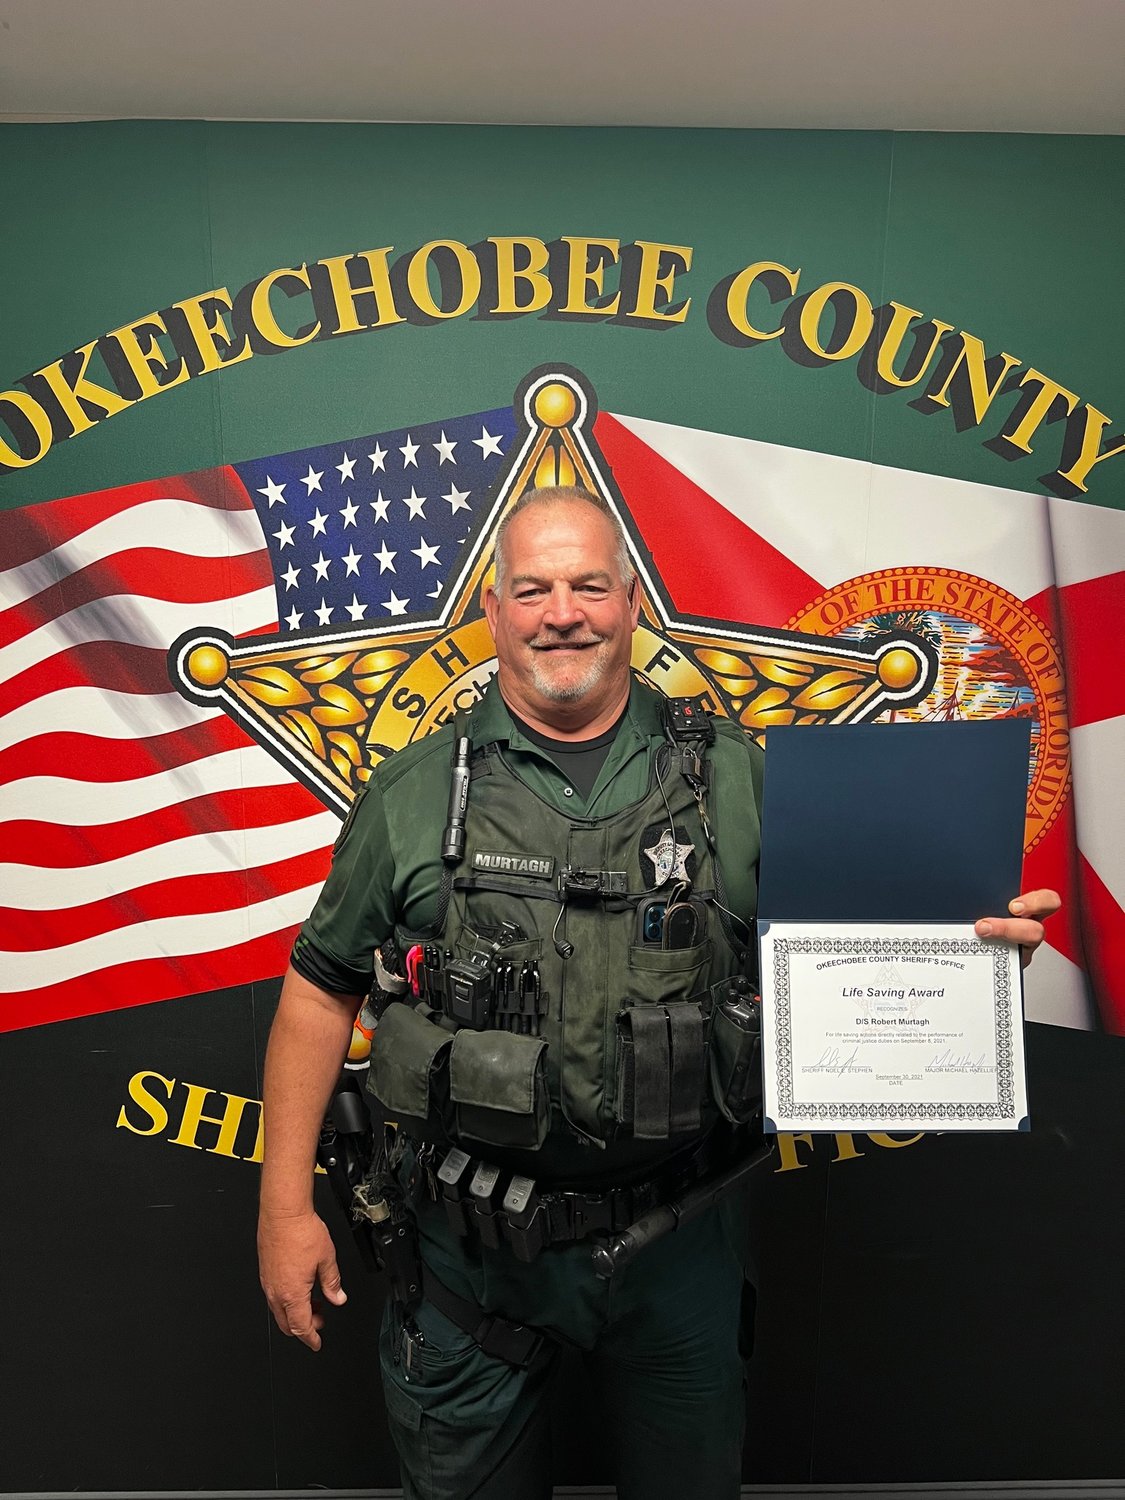 Deputy Robert Murtagh was recognized for saving a life.